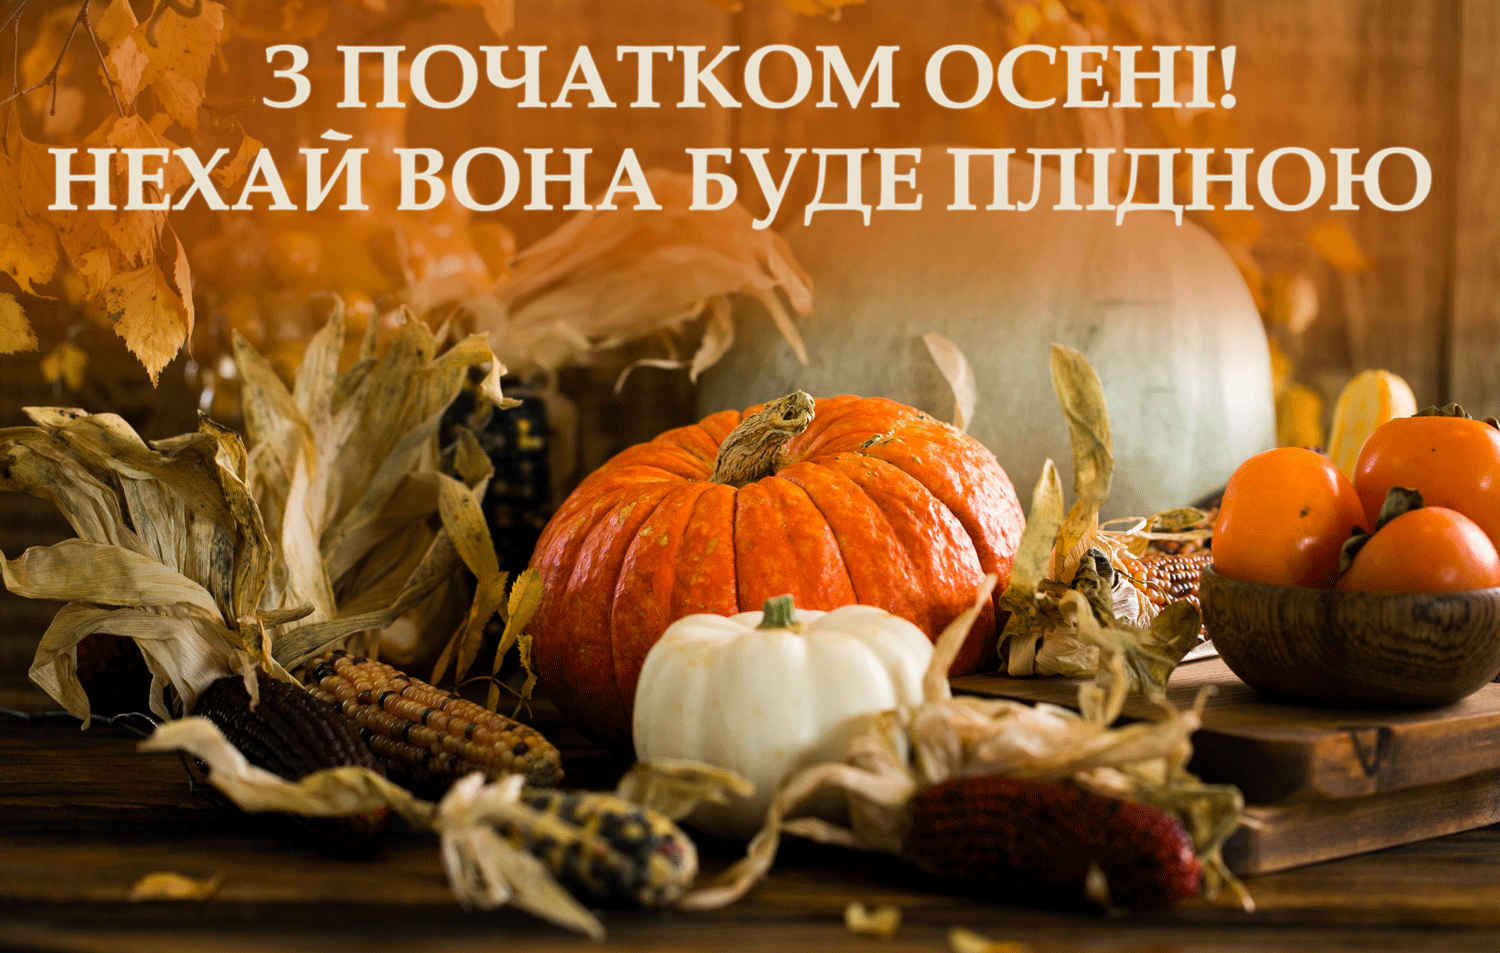 Happy first day of fall: warm greetings for loved ones. Pictures and sms